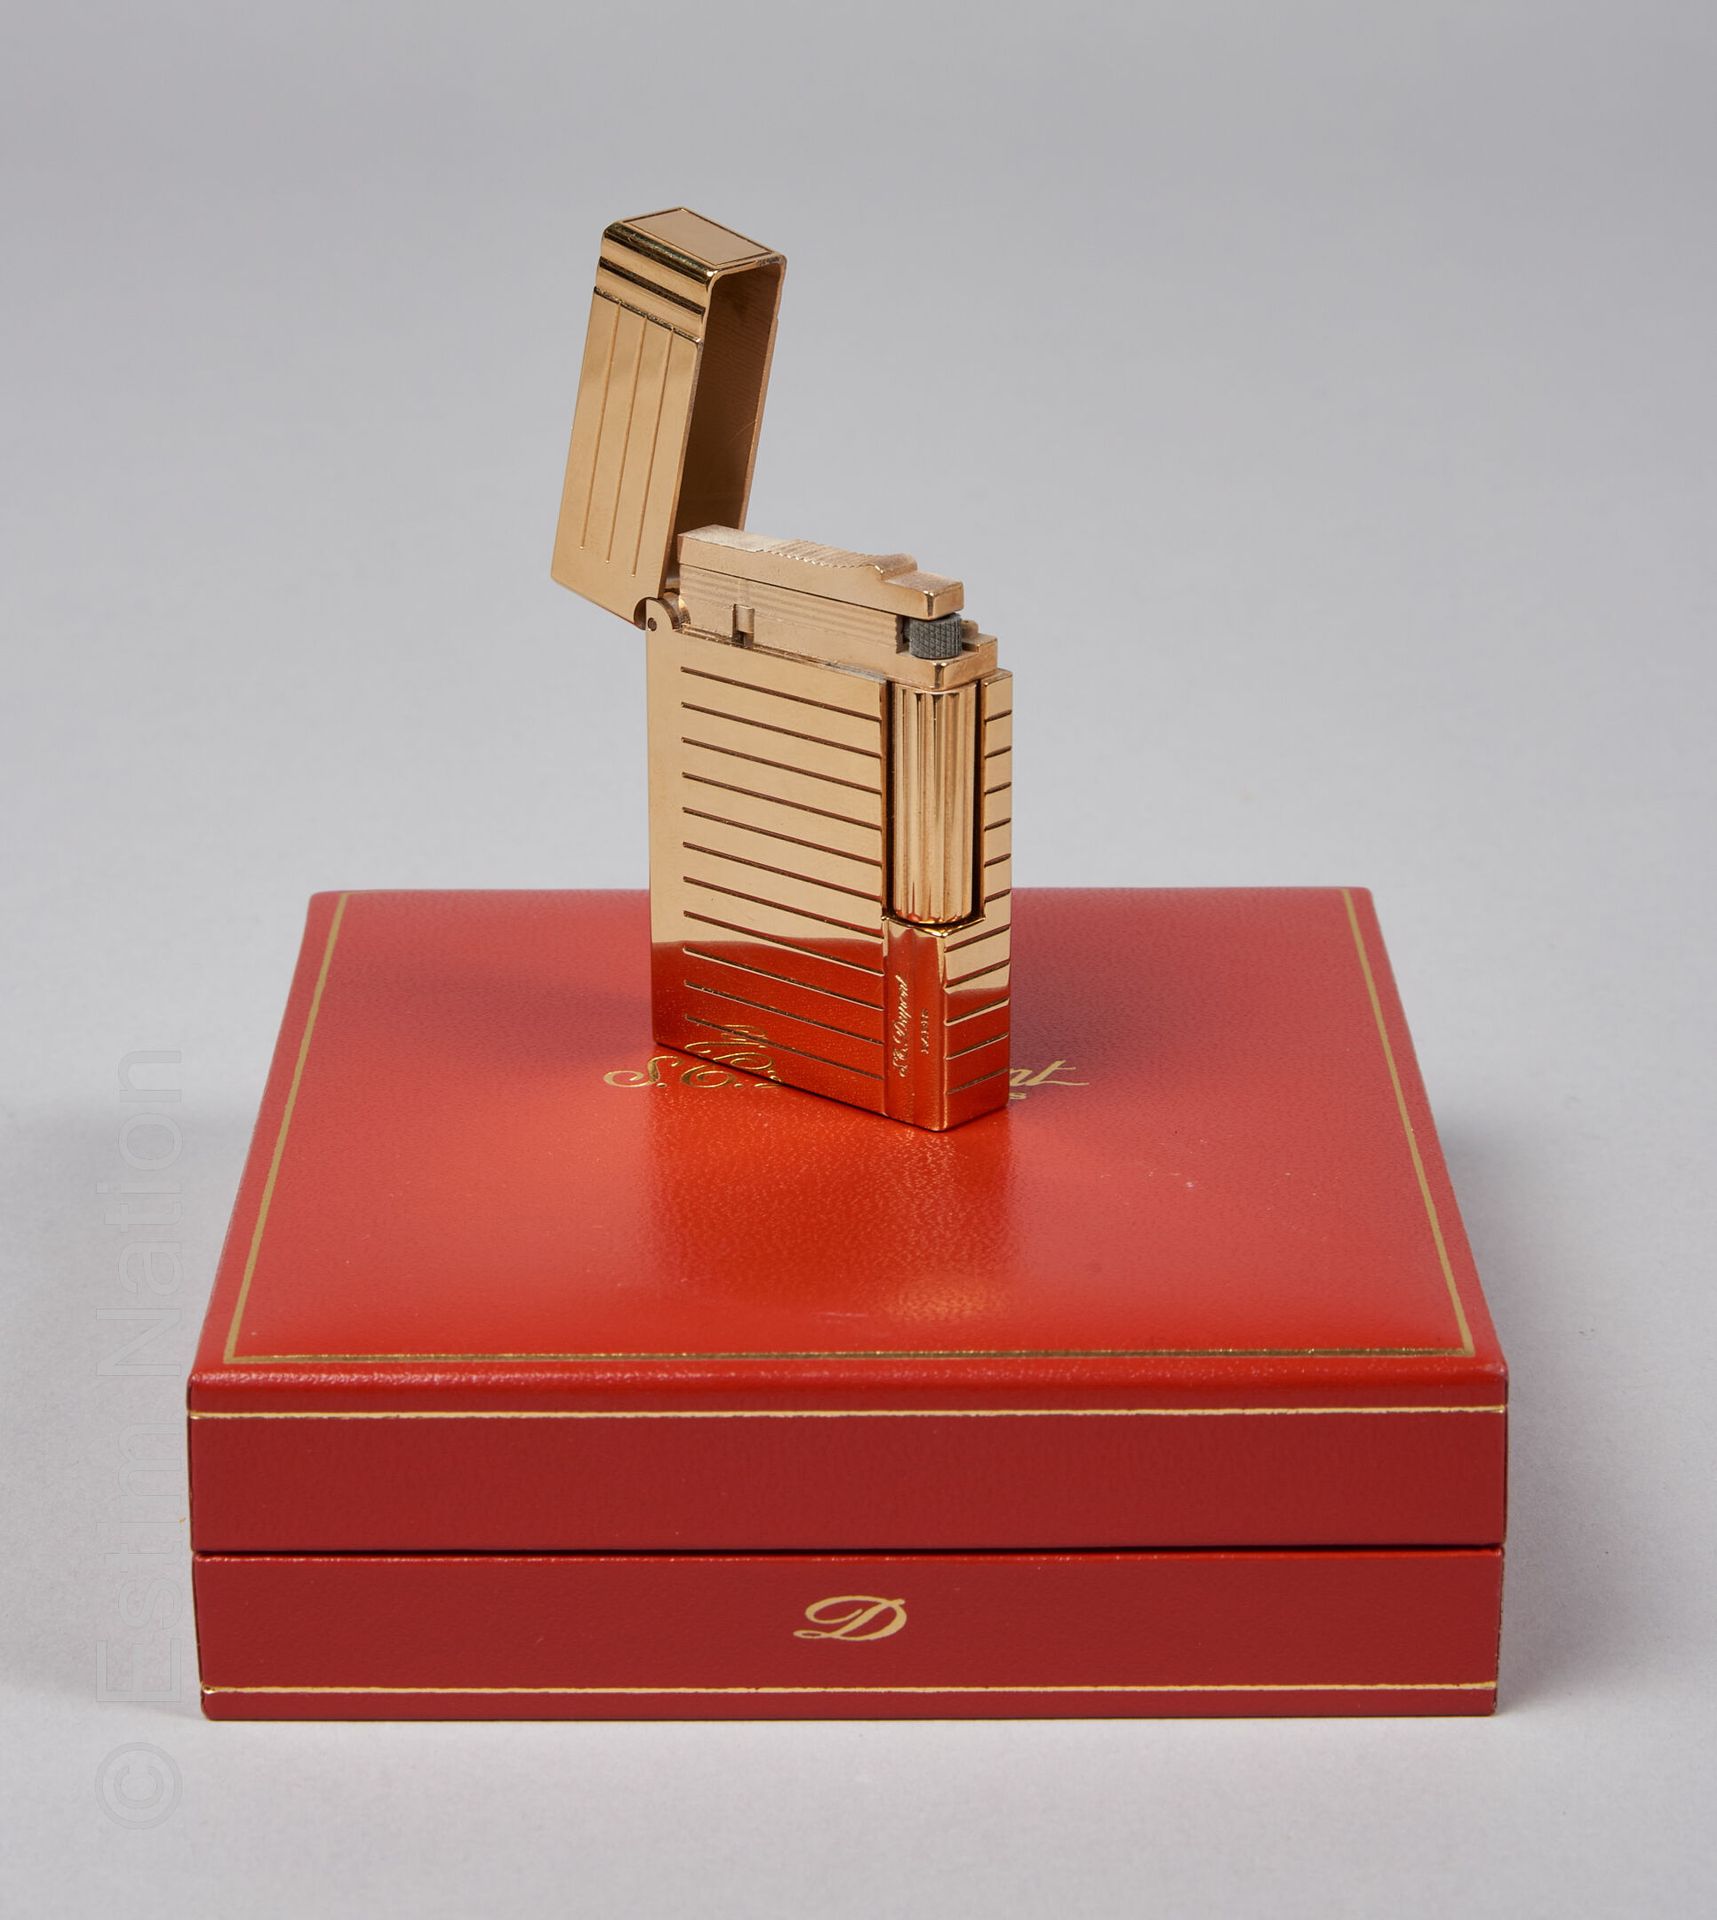 S.T. DUPONT BRIQUET in gold plated metal (in its case)